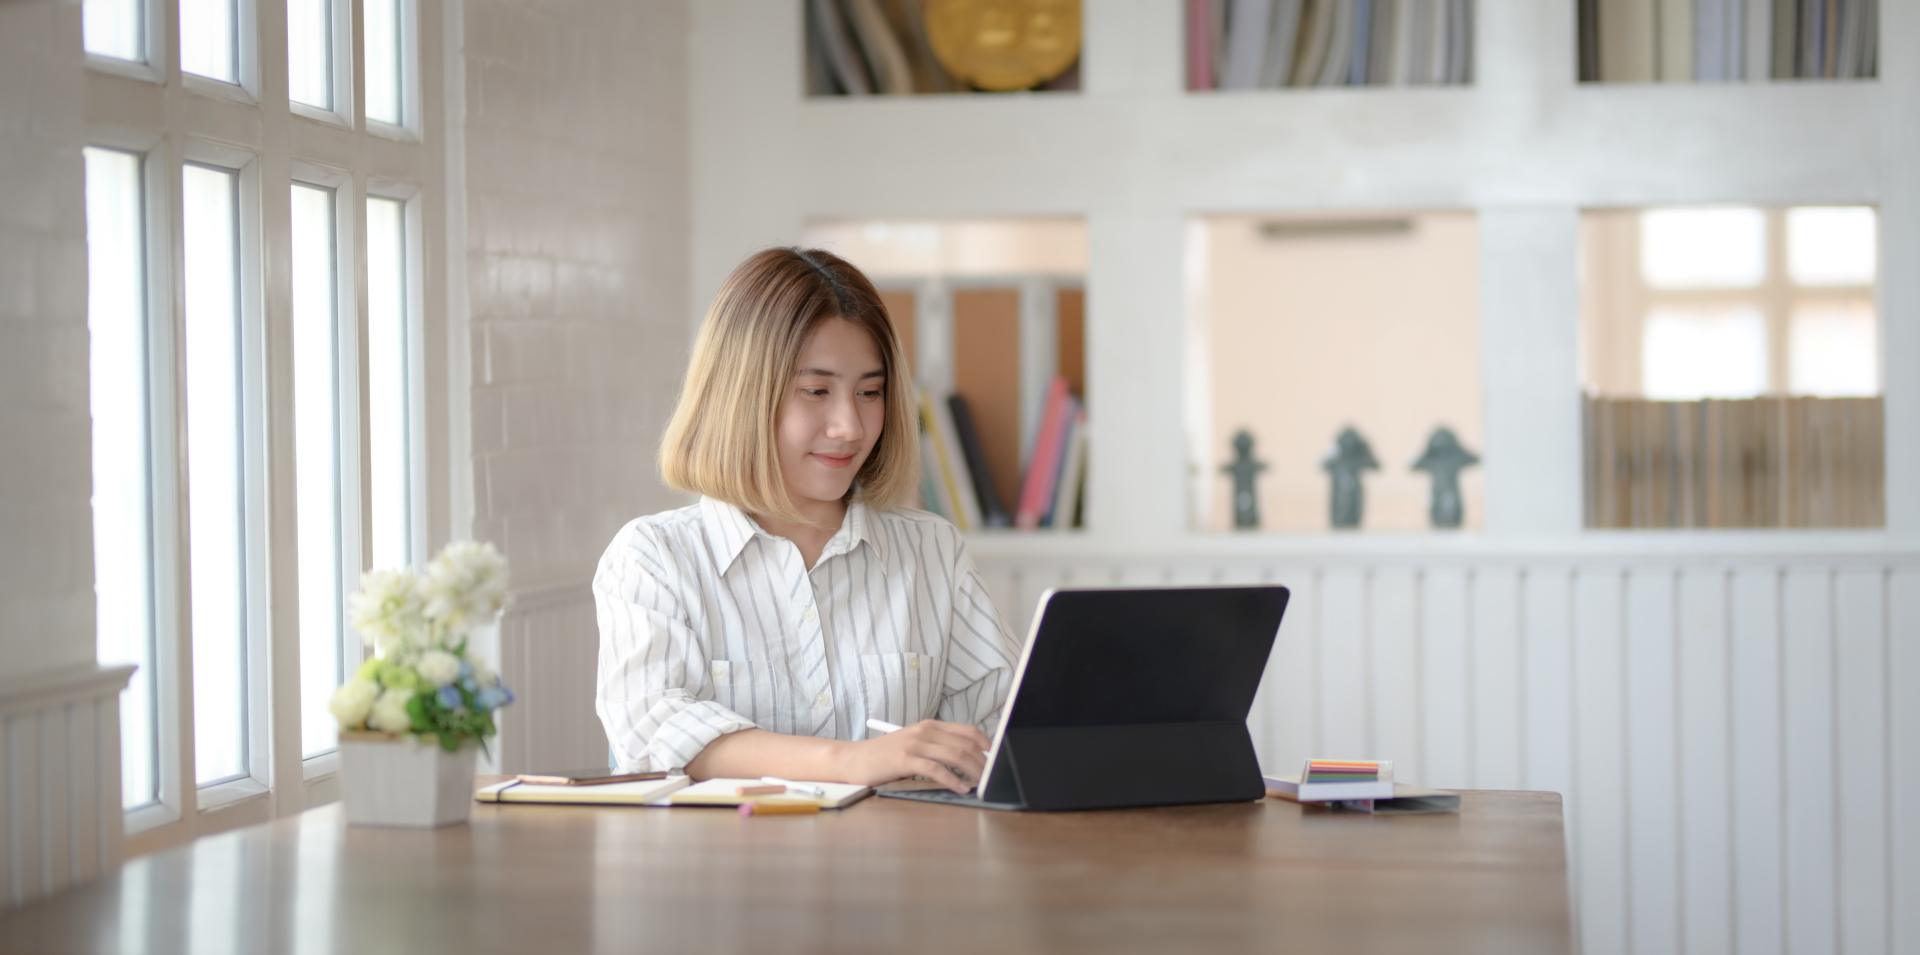 Lady working from home on Laptop in a very bright room